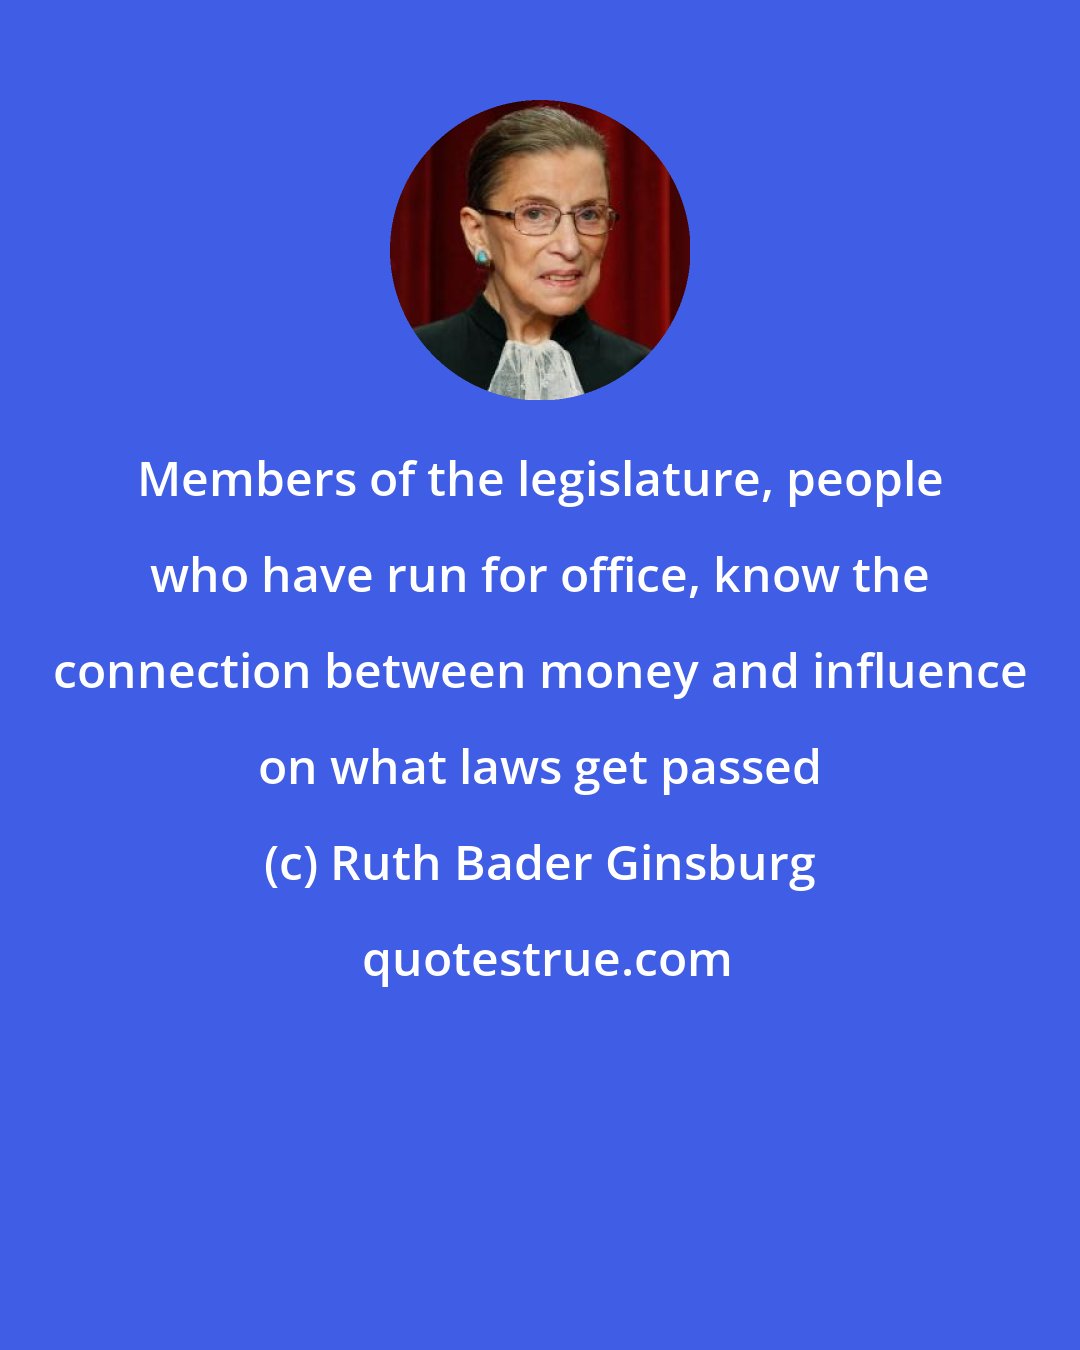 Ruth Bader Ginsburg: Members of the legislature, people who have run for office, know the connection between money and influence on what laws get passed